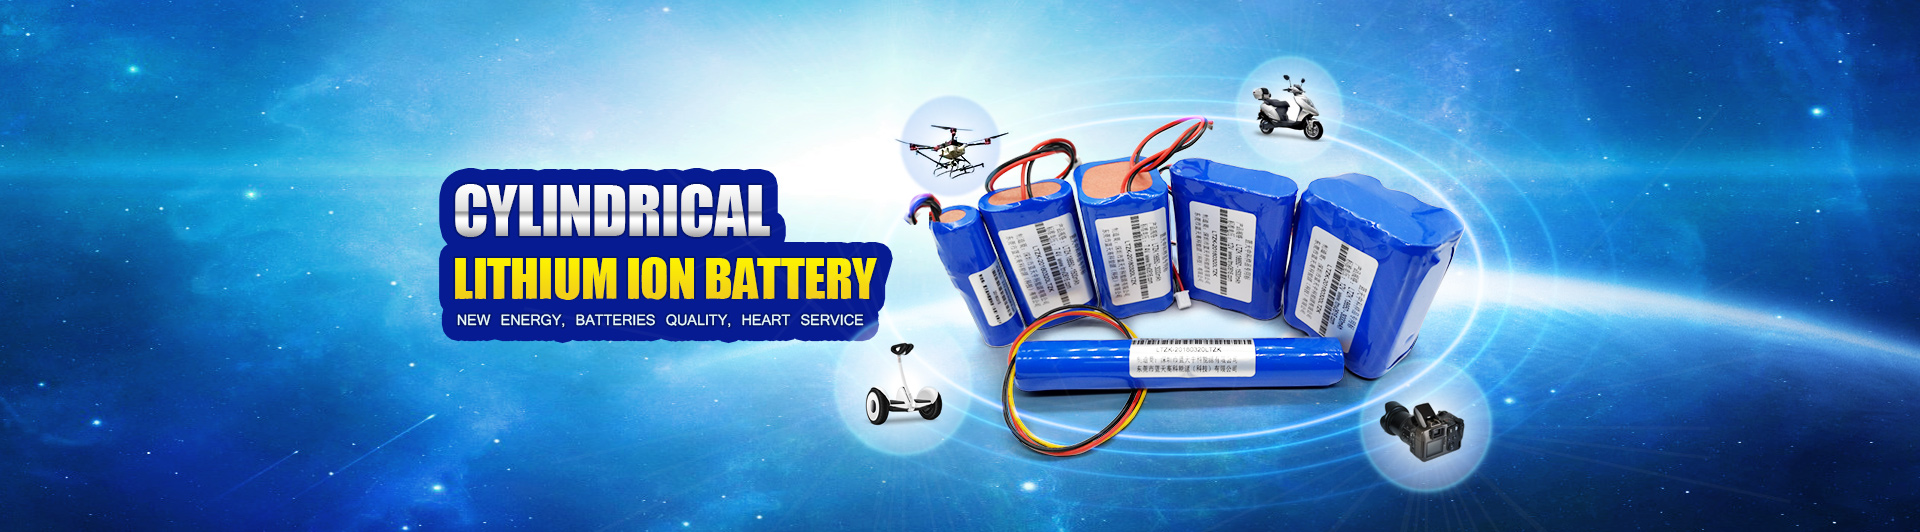 Cylindrical lithium ion battery pack  